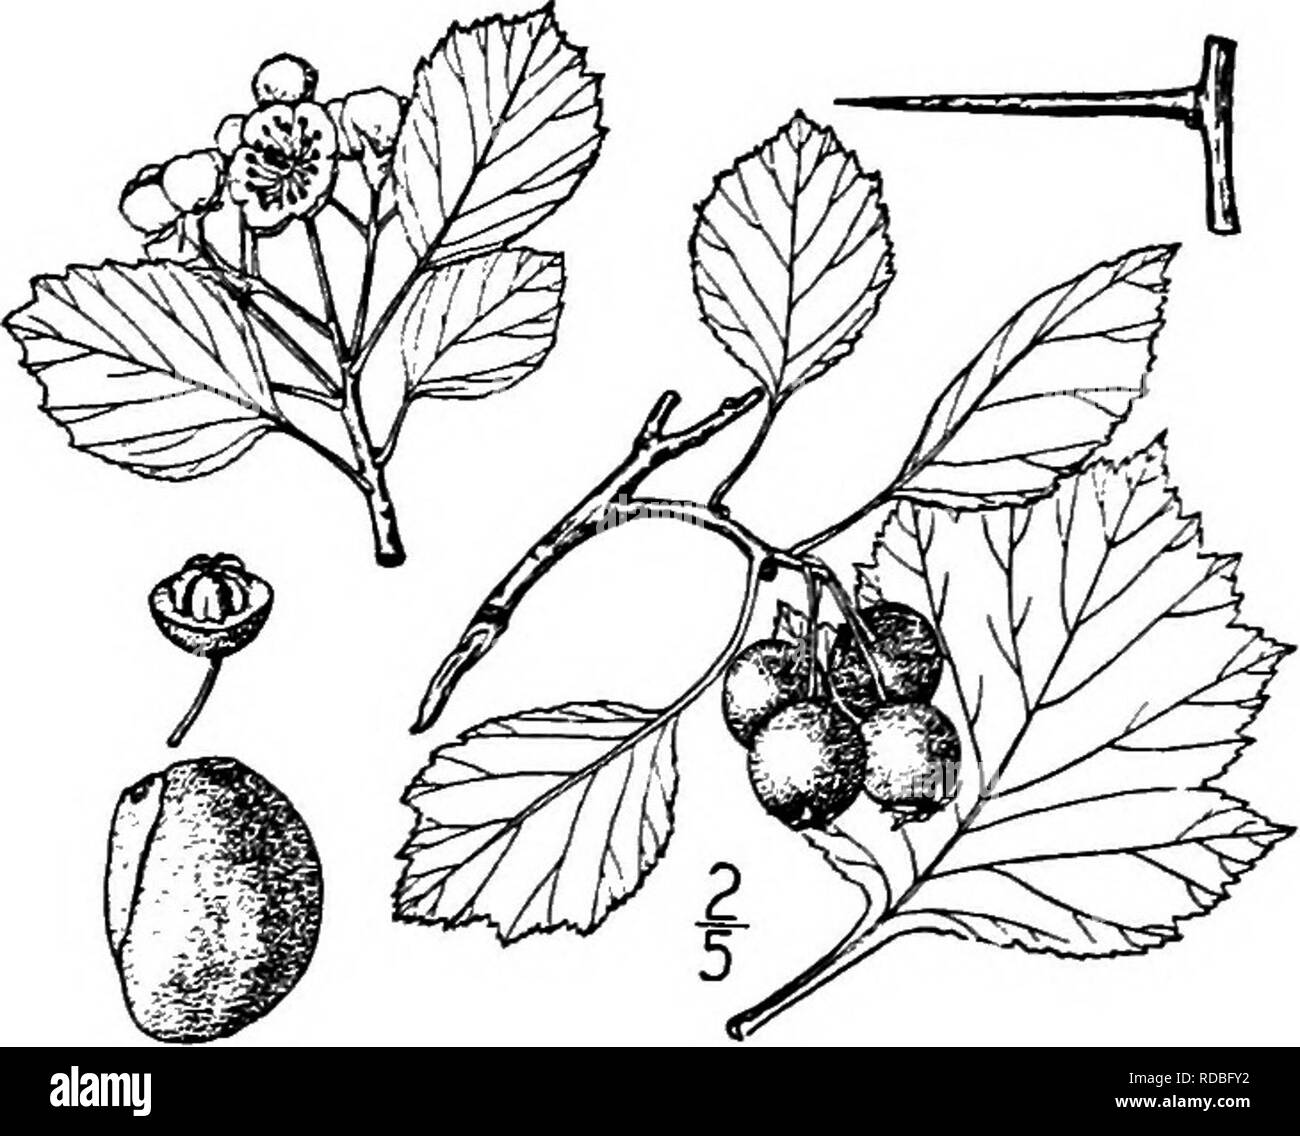 . North American trees : being descriptions and illustrations of the trees growing independently of cultivation in North America, north of Mexico and the West Indies . Trees. Fig. 398. — Large-fruited Thorn. 9. CAUGHNAWAGA THORN — Crataegus suborbiculata Sargent This thorn occurs about the limestone ridges of the Caughnawaga Indian reservation and on the island of Mon- treal, Quebec. It is a tree from 5 to 6 meters high, with spreading branches, forming a broad flat-topped crown; the twigs are smooth and are armed with straight or curved chestnut-brown spines, from 3 to 5 cm. long. The leaves  Stock Photo